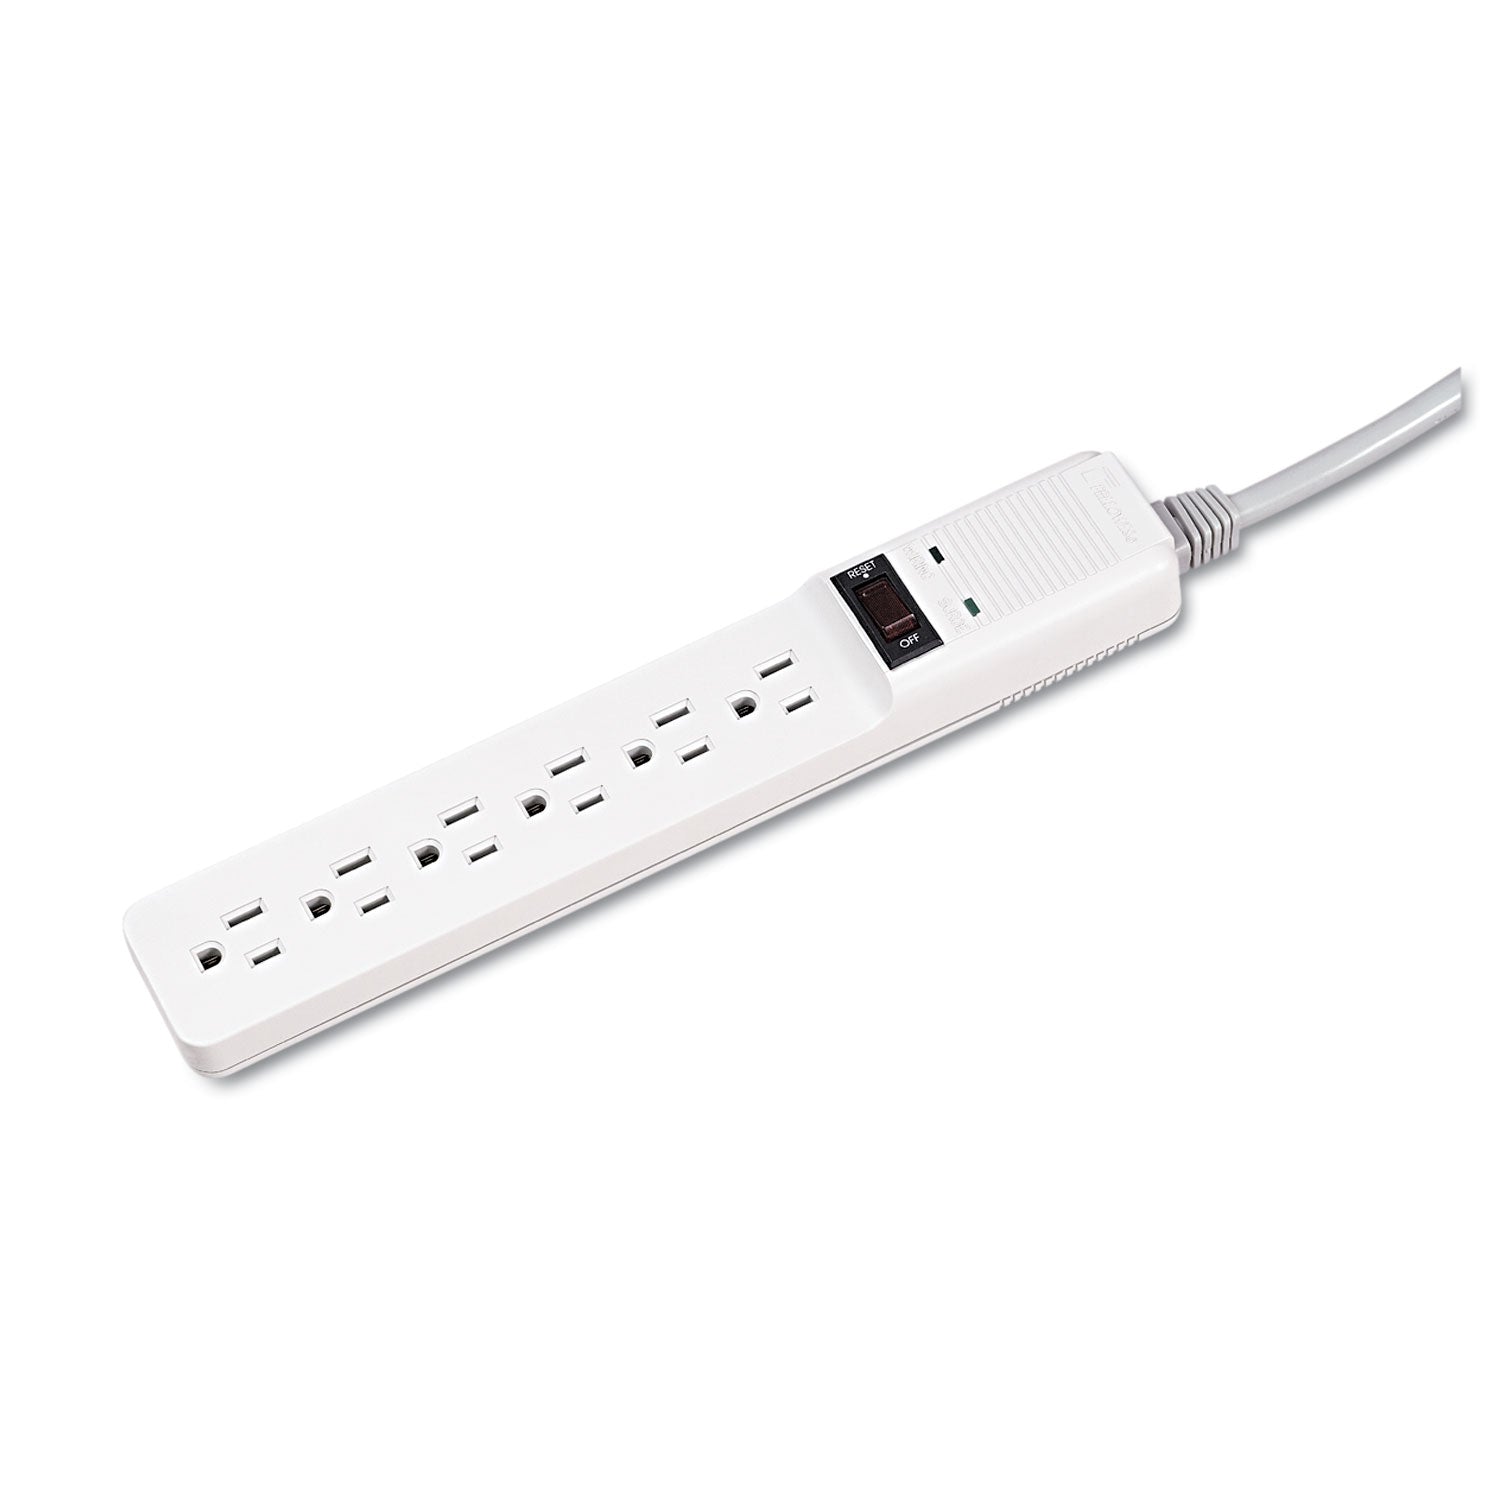 Basic Home/Office Surge Protector, 6 AC Outlets, 6 ft Cord, 450 J, Platinum - 